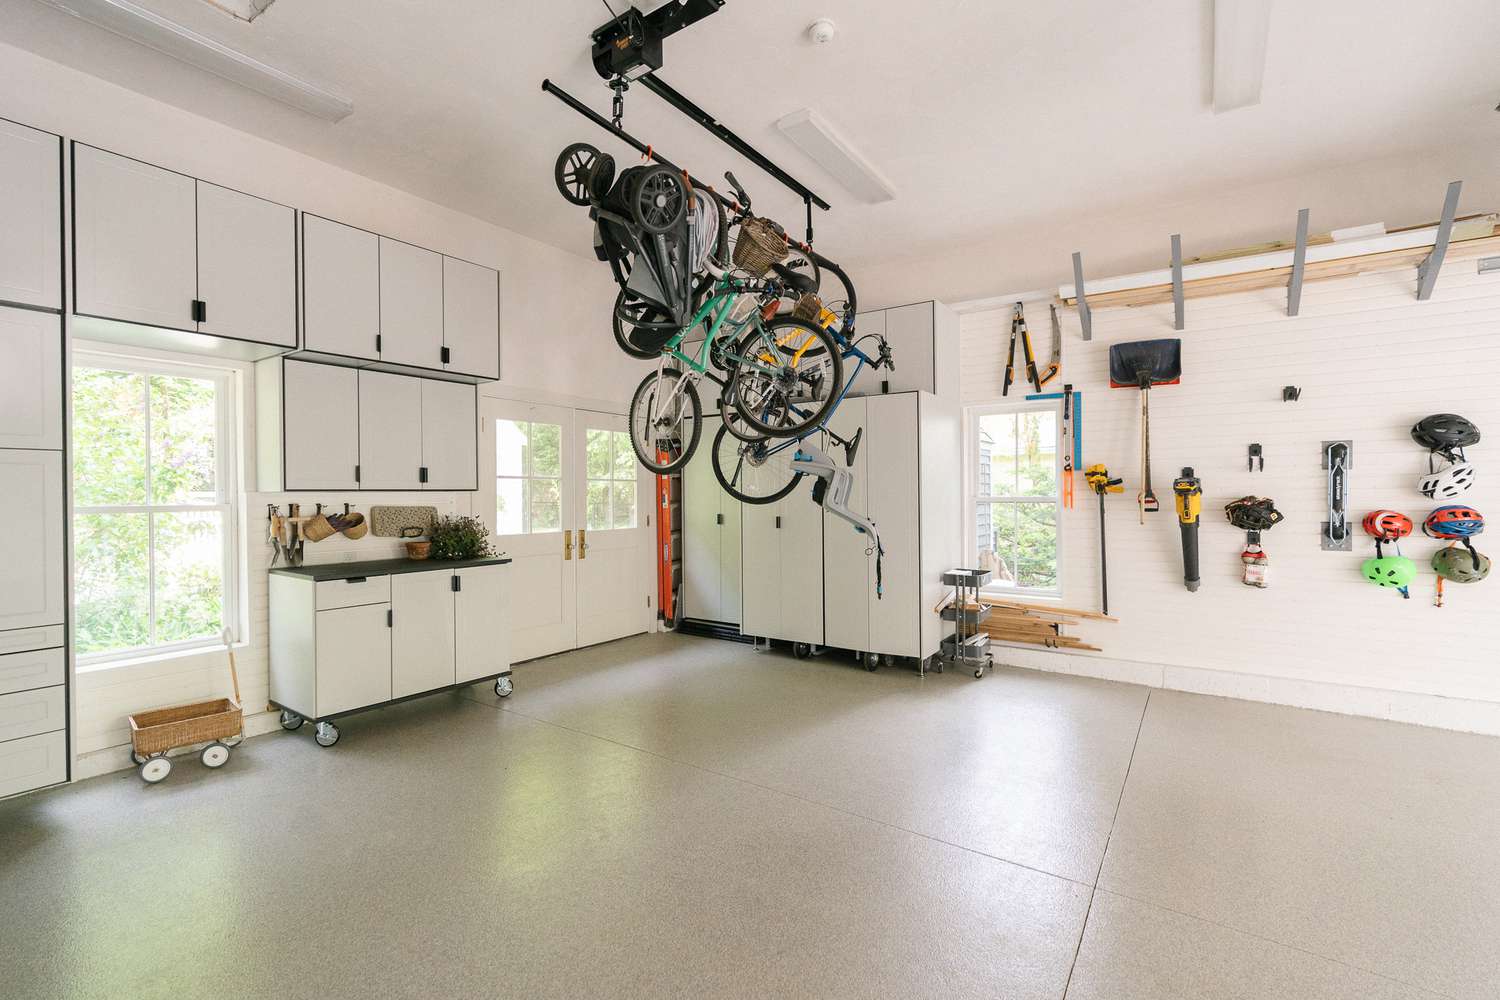 Bikes hanging from a ceiling rack in a garage